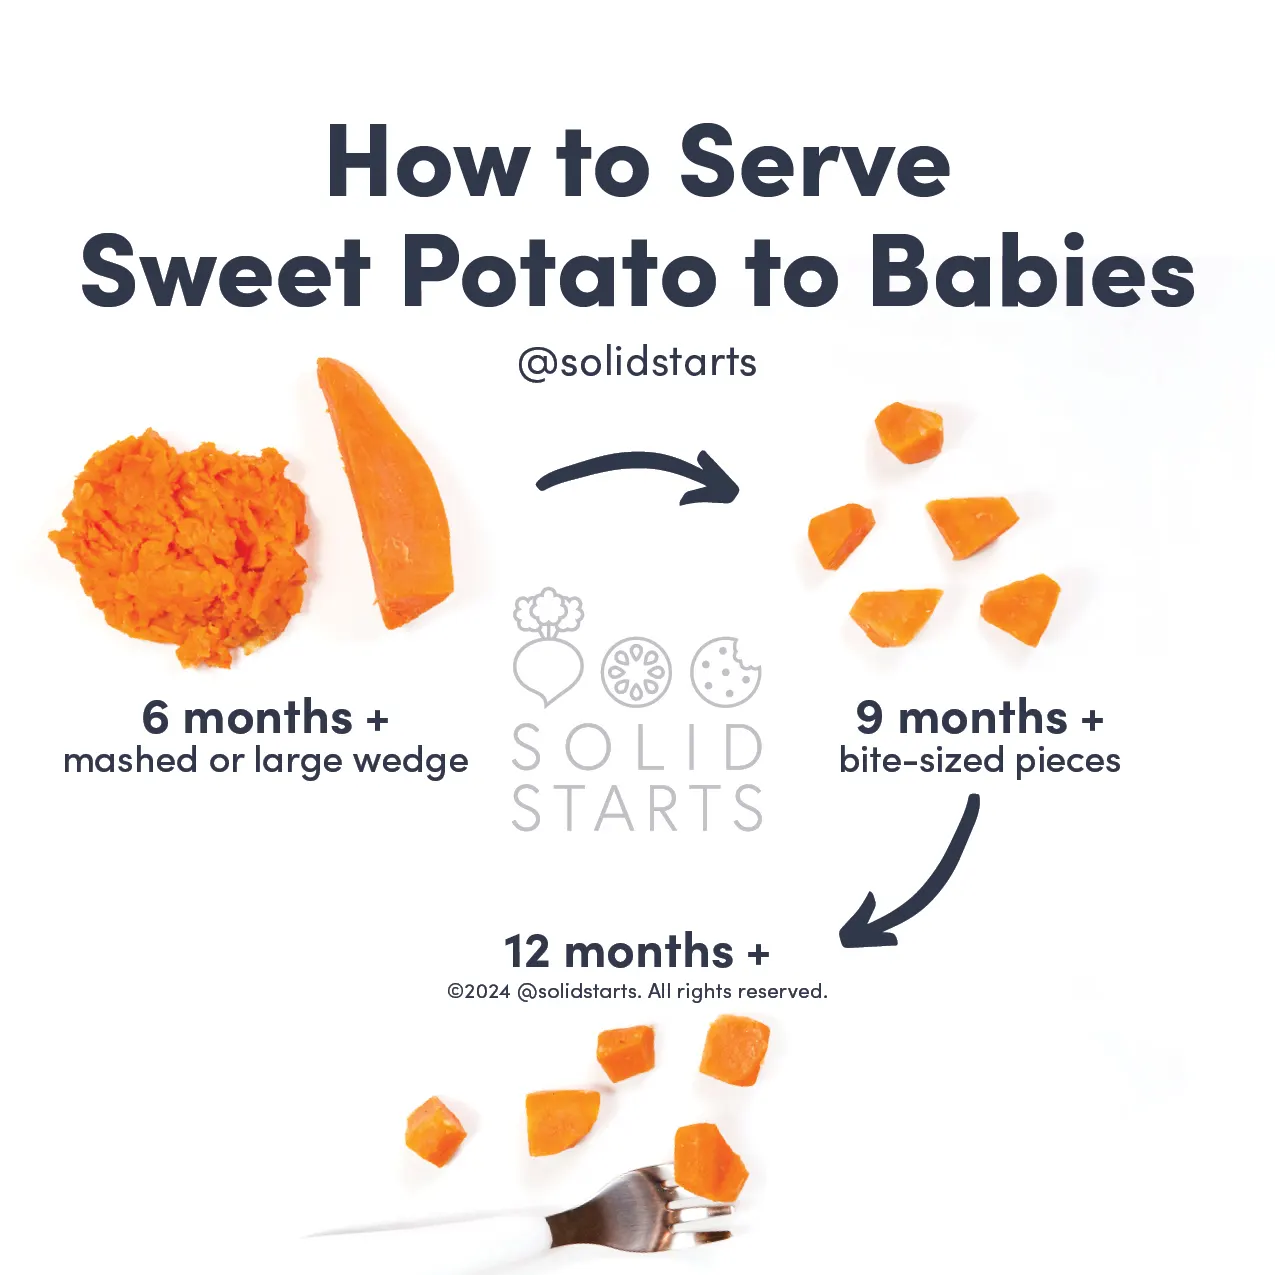 an infographic with the header "how to cut sweet potato for babies": long, thin cooked strips for babies 6 months+, small, bite-sized cooked pieces for babies 9 months +